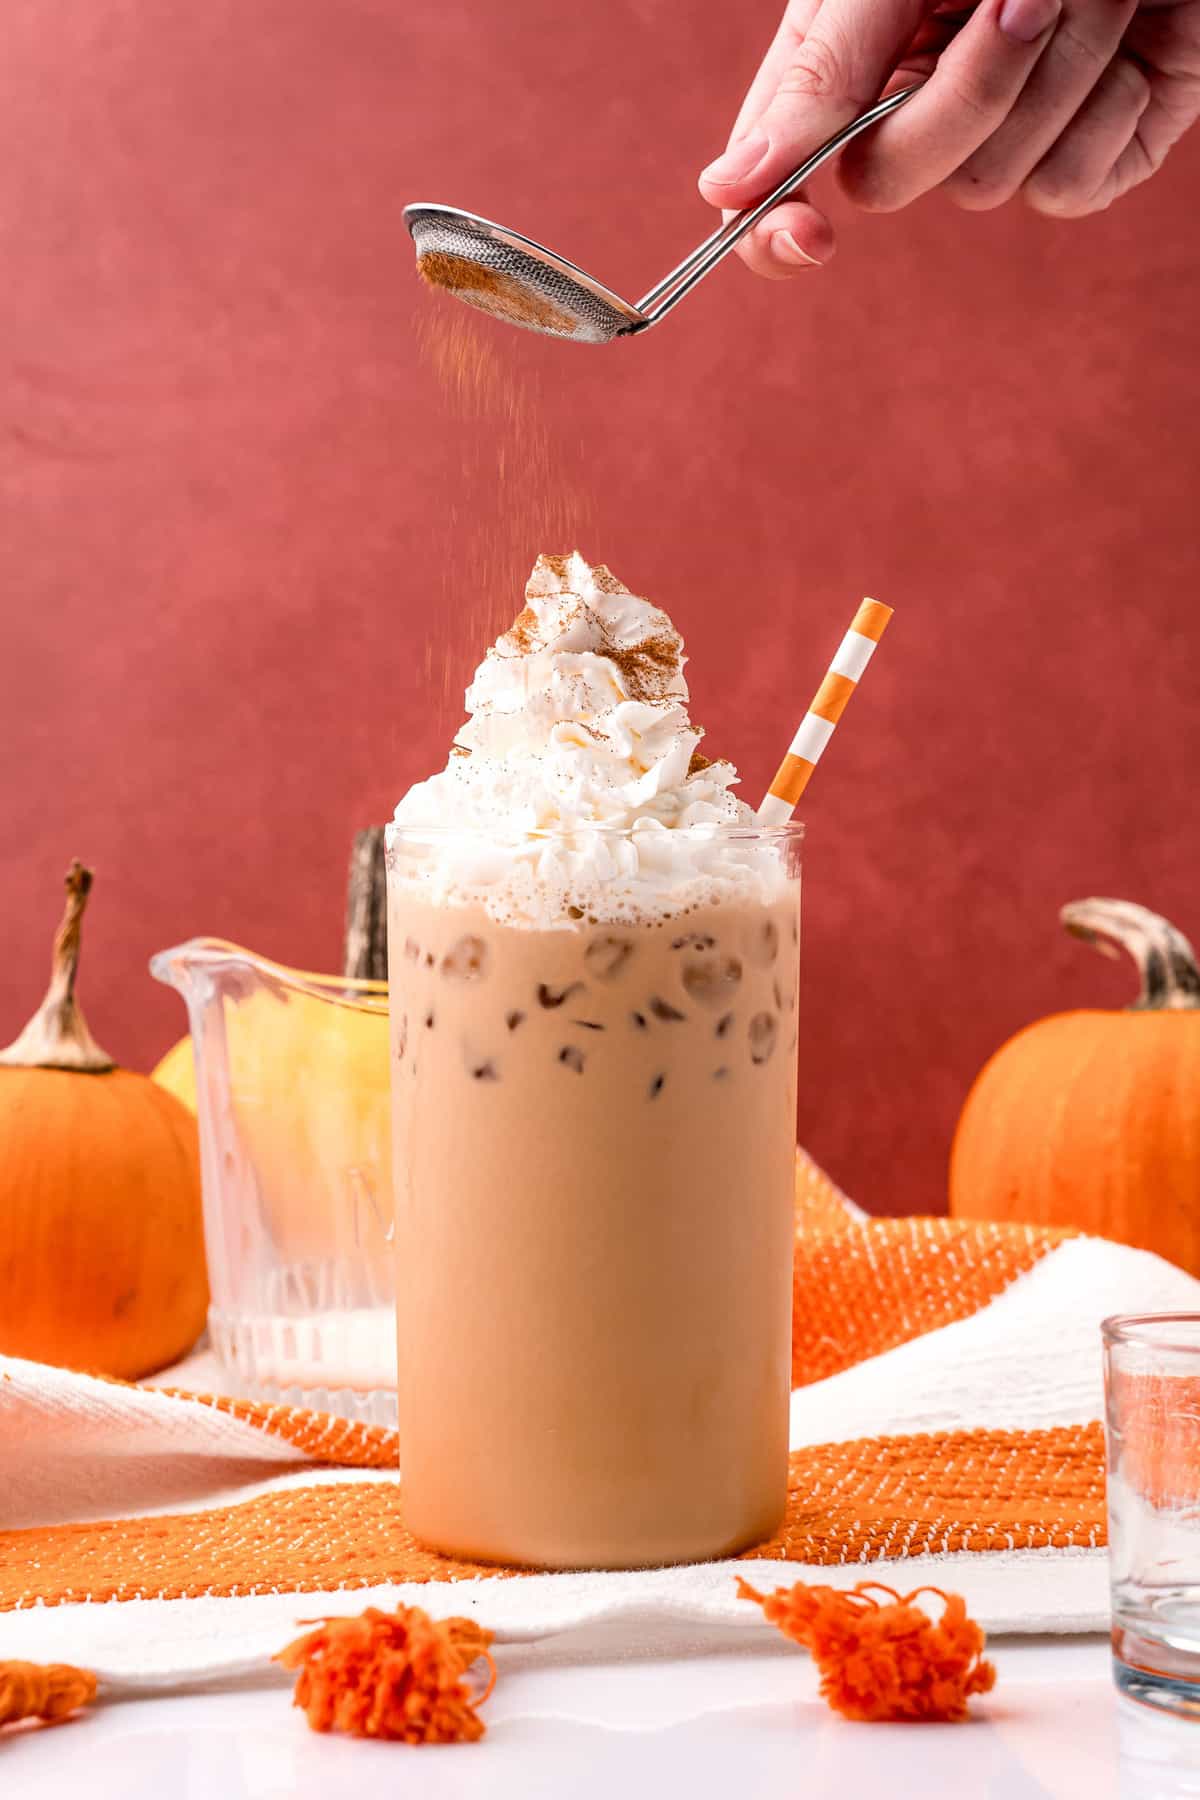 Pumpkin pie spice being sprinkled on an iced latte.